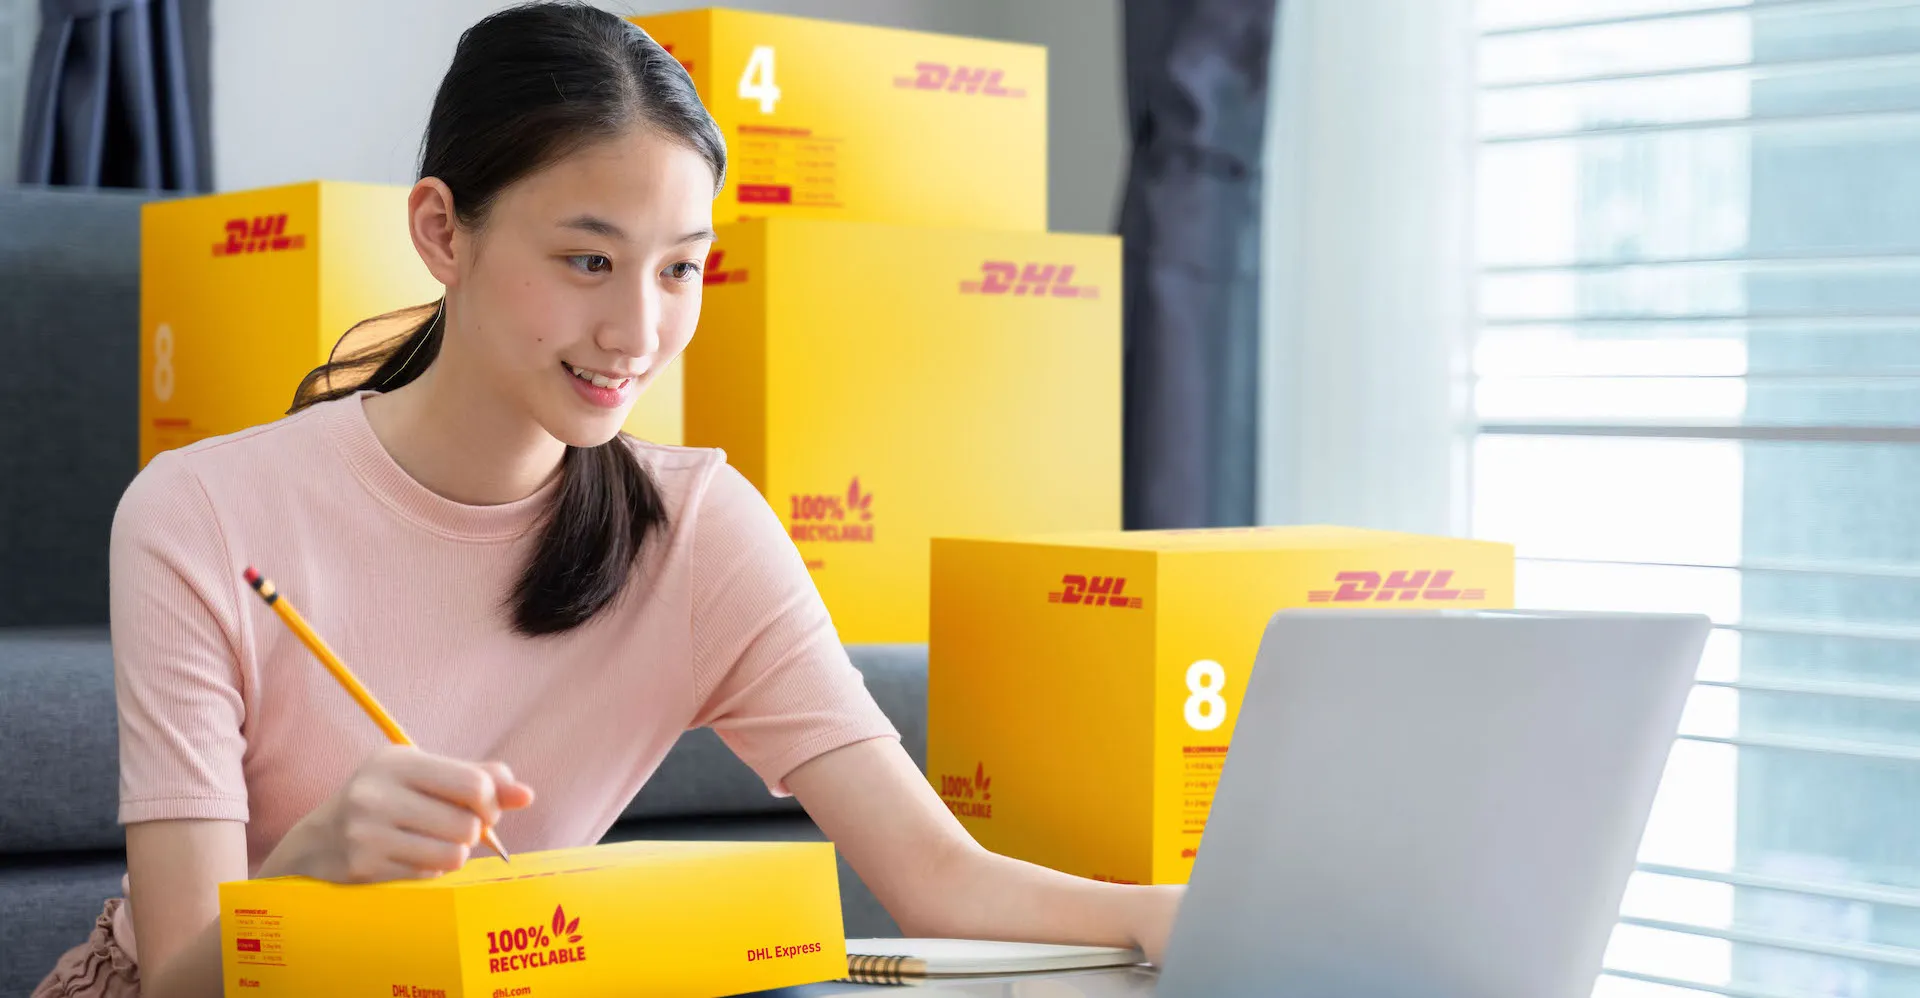 Dhl Global Mail Tracking